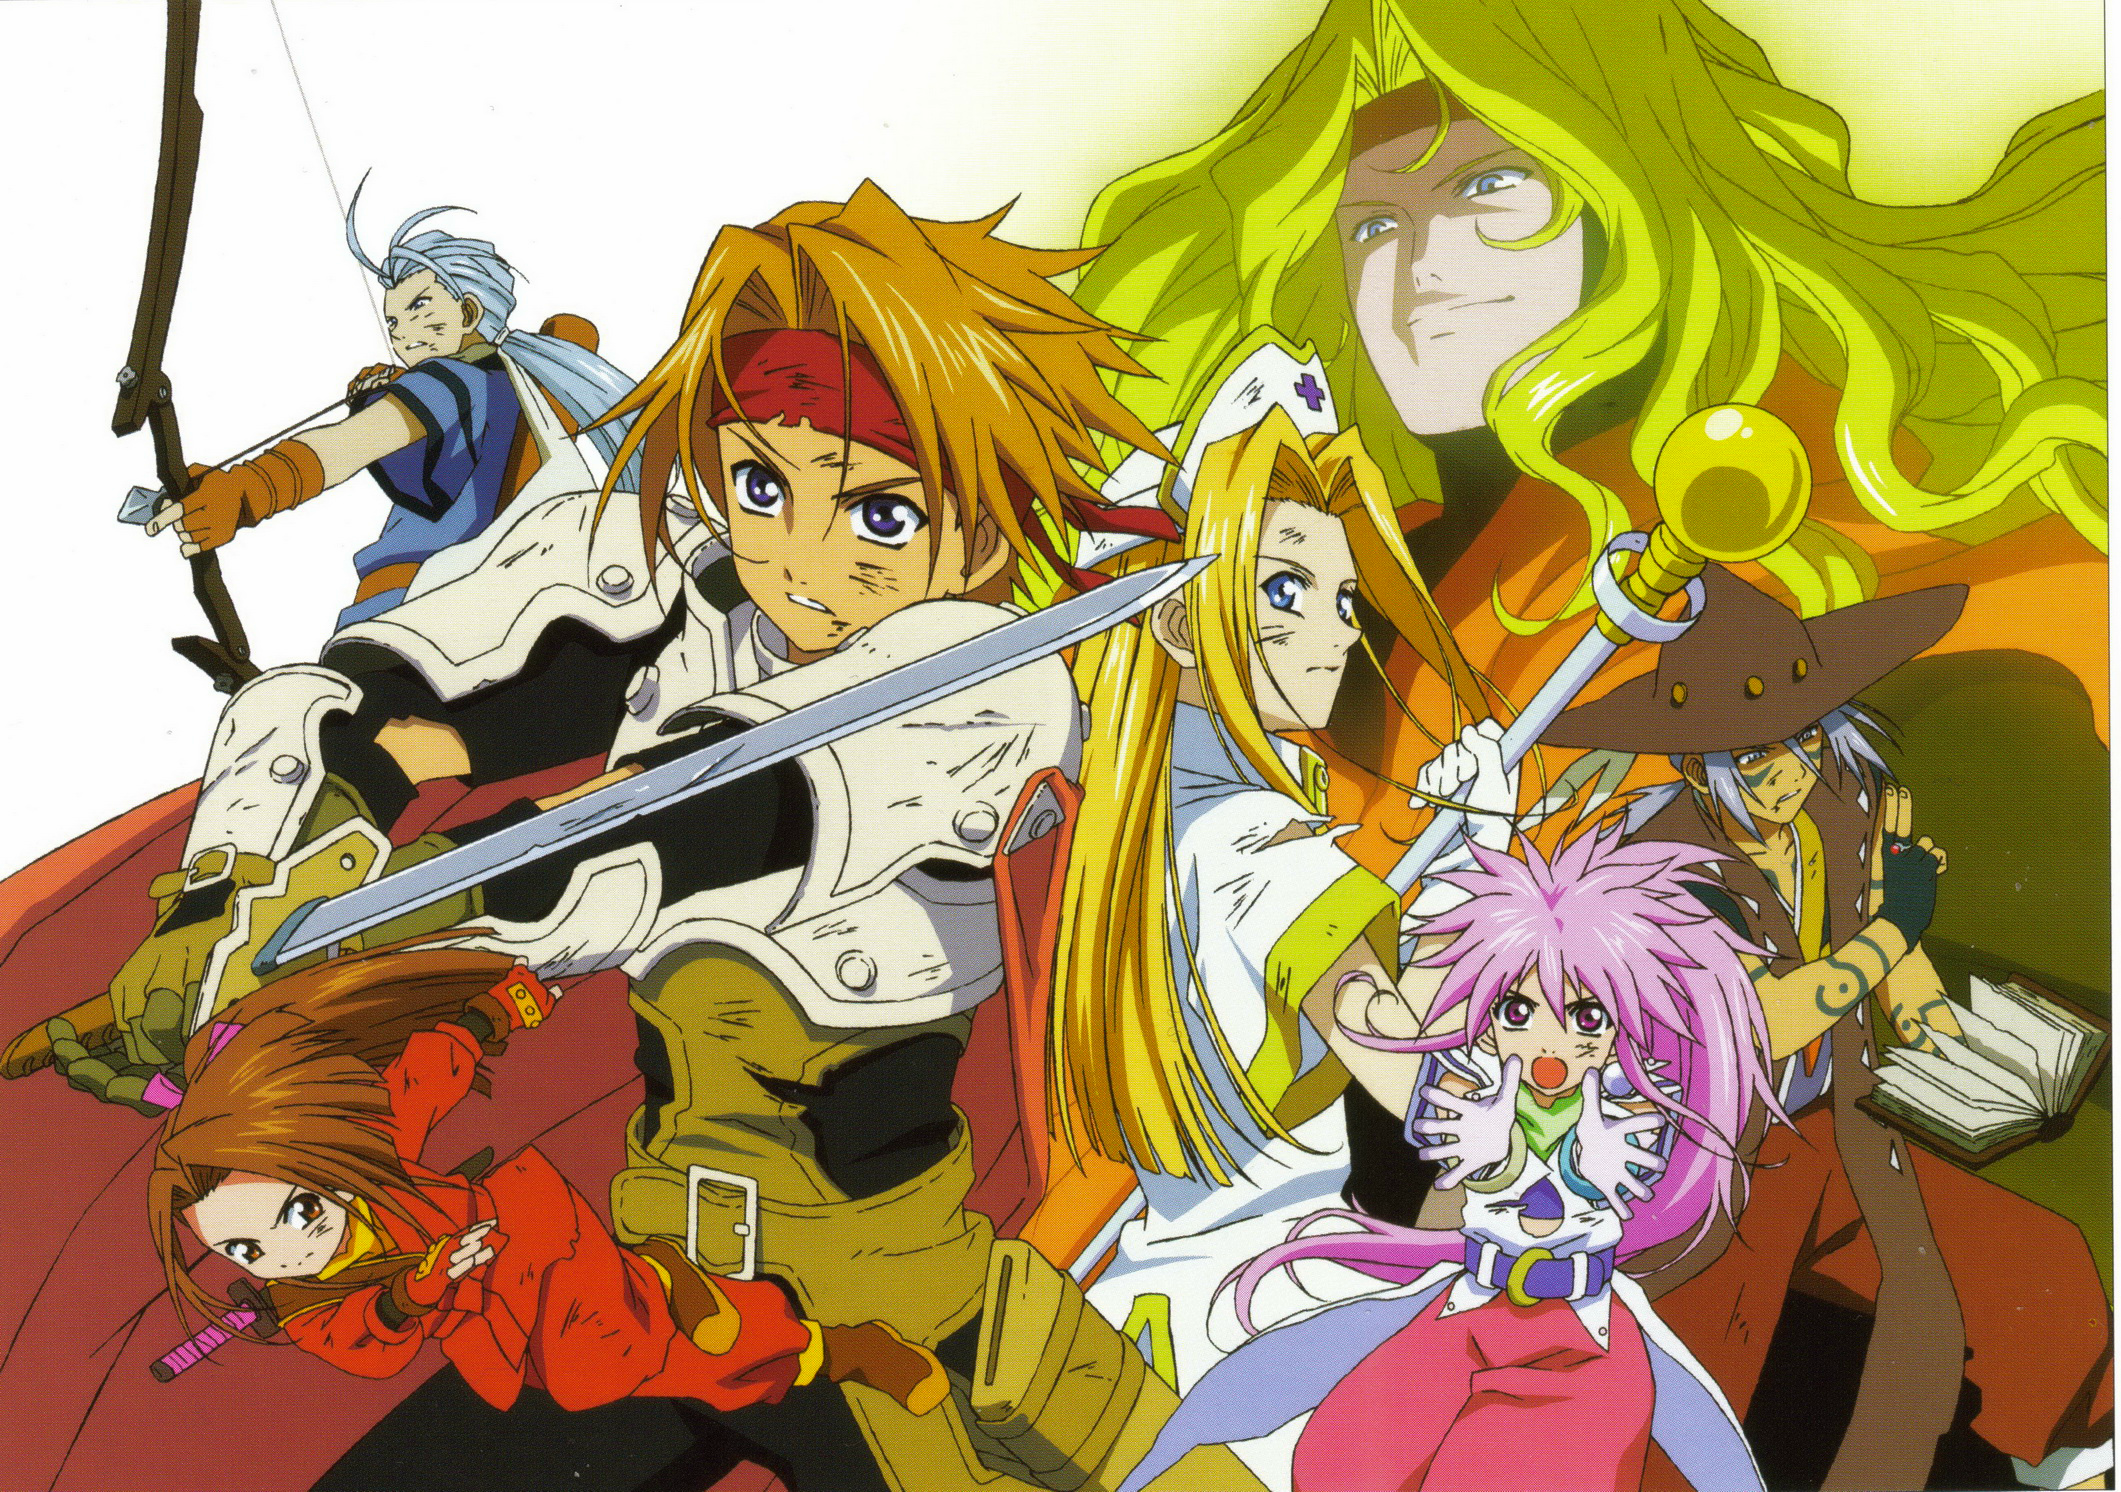 Video Game Tales Of Phantasia HD Wallpaper | Background Image